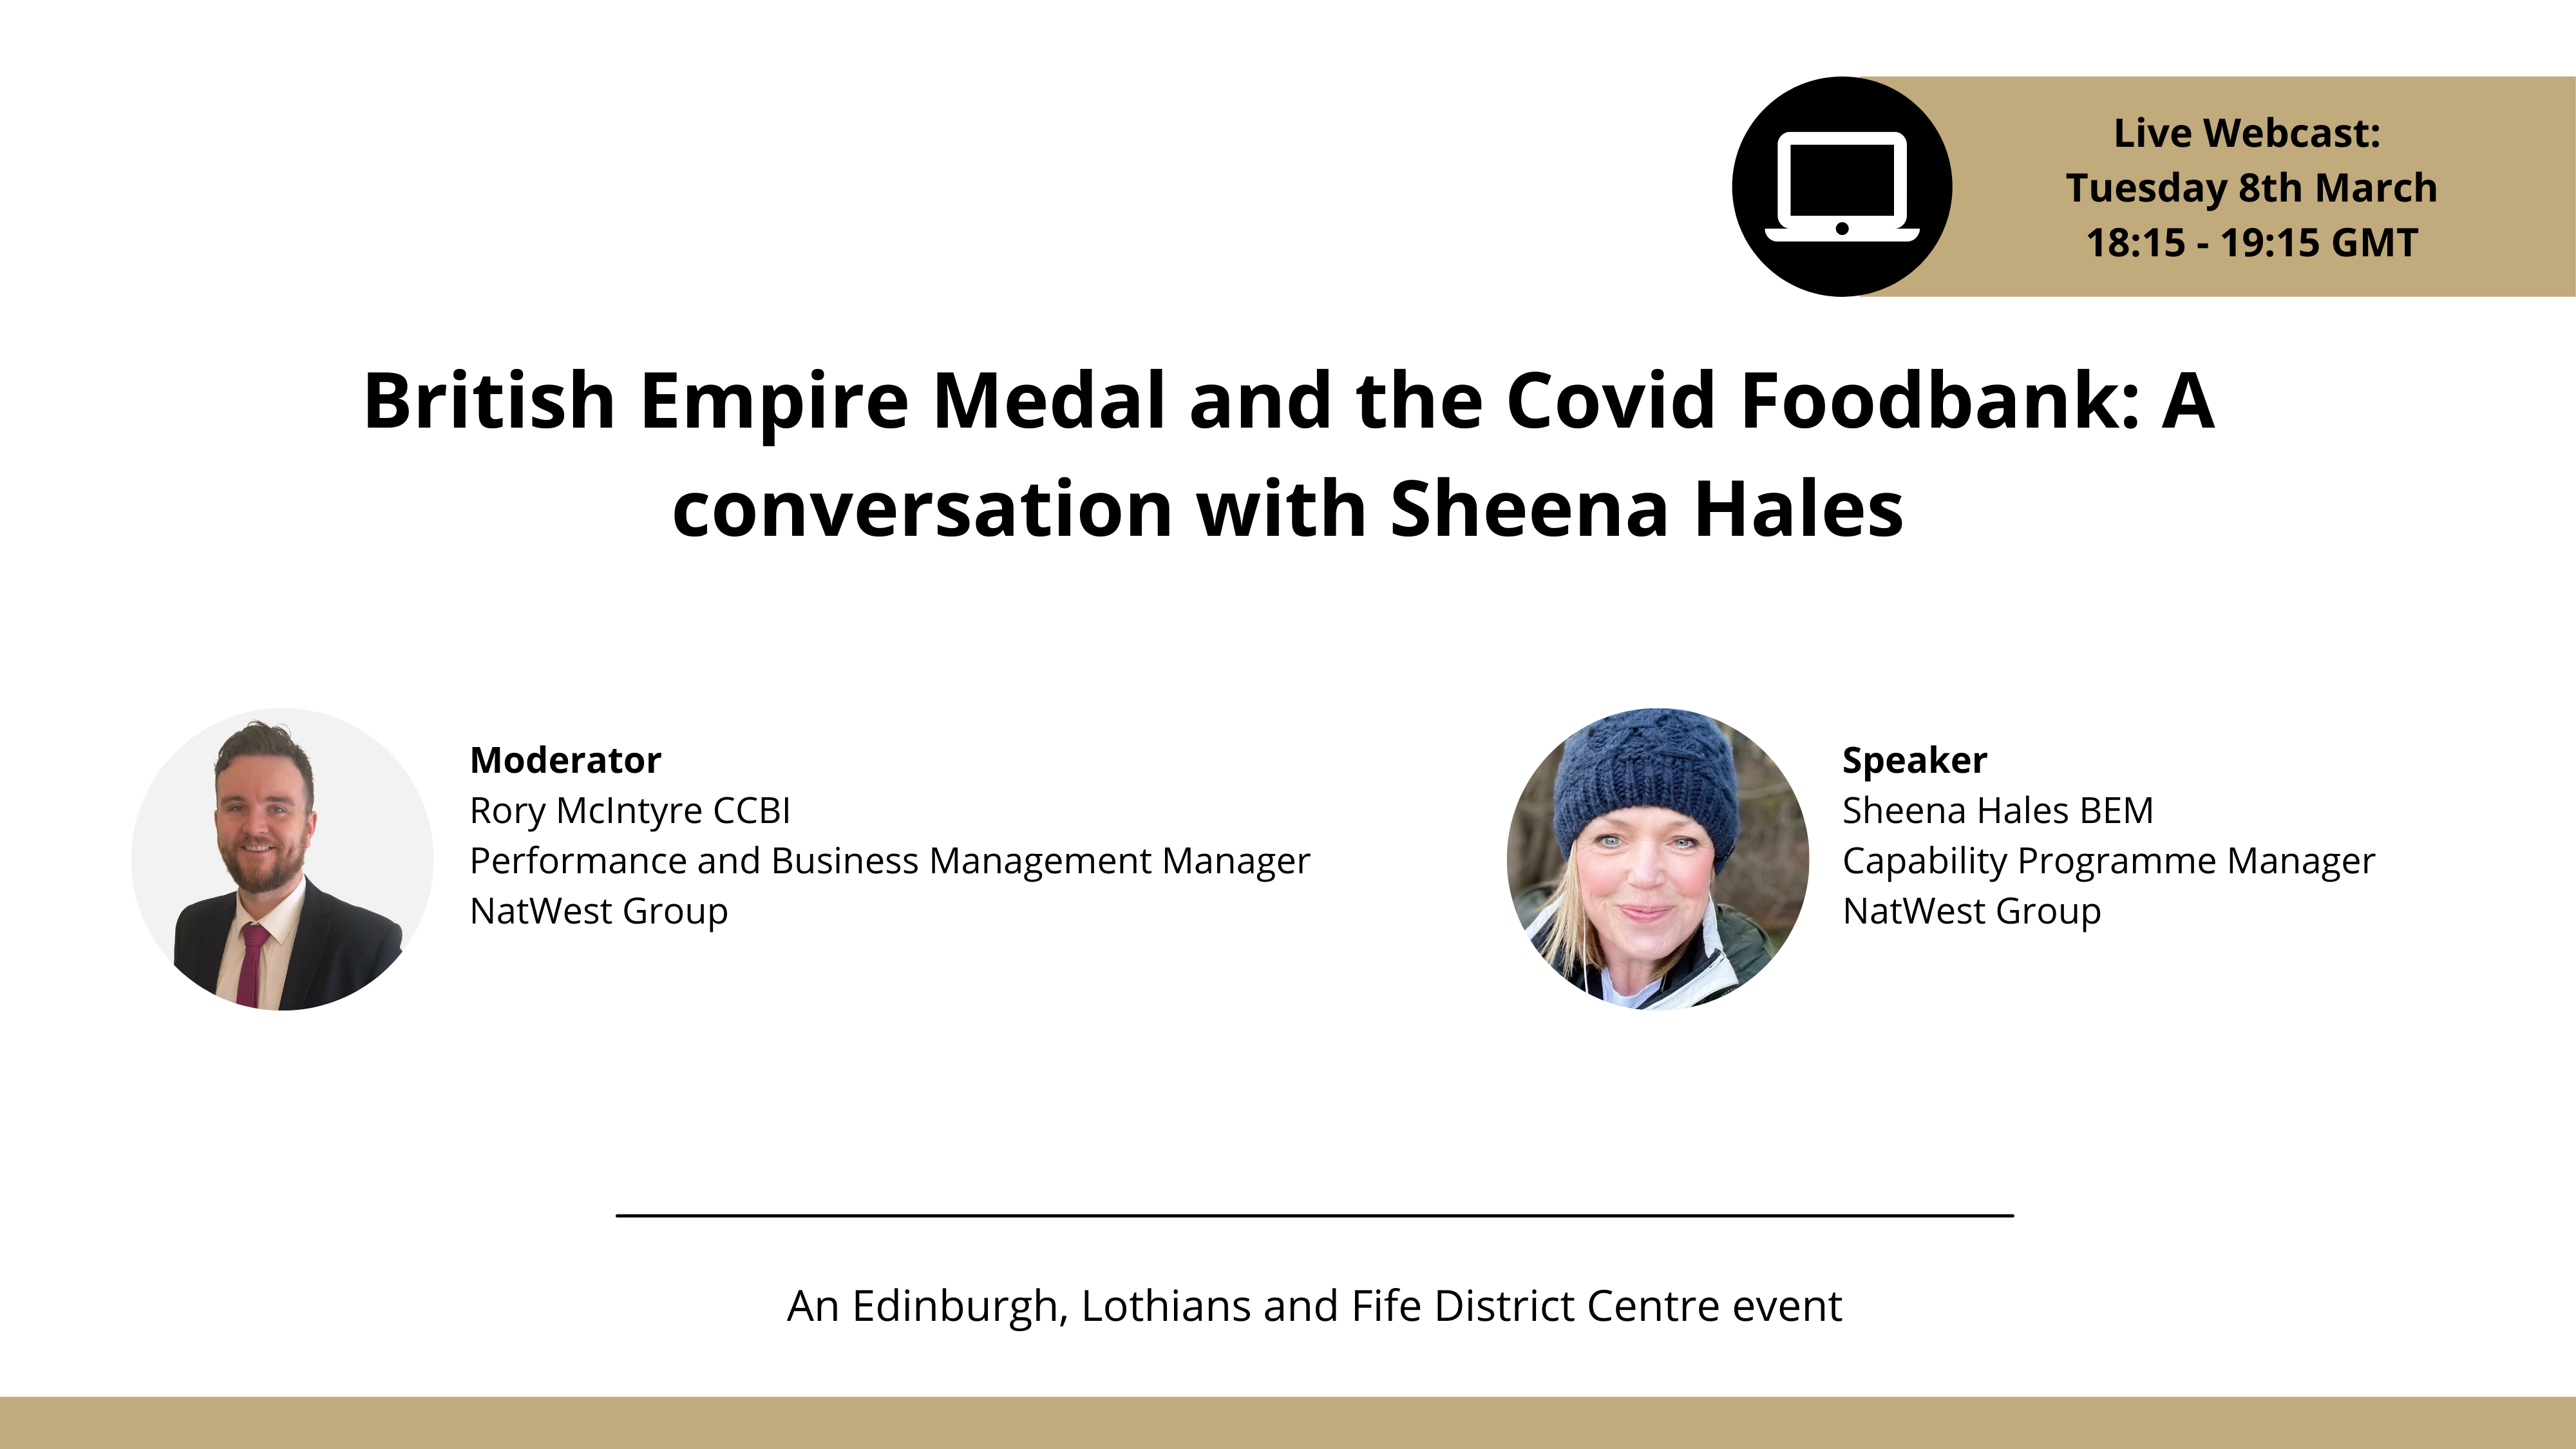 British Empire Medal and the Covid Foodbank: A conversation with Sheena Hales